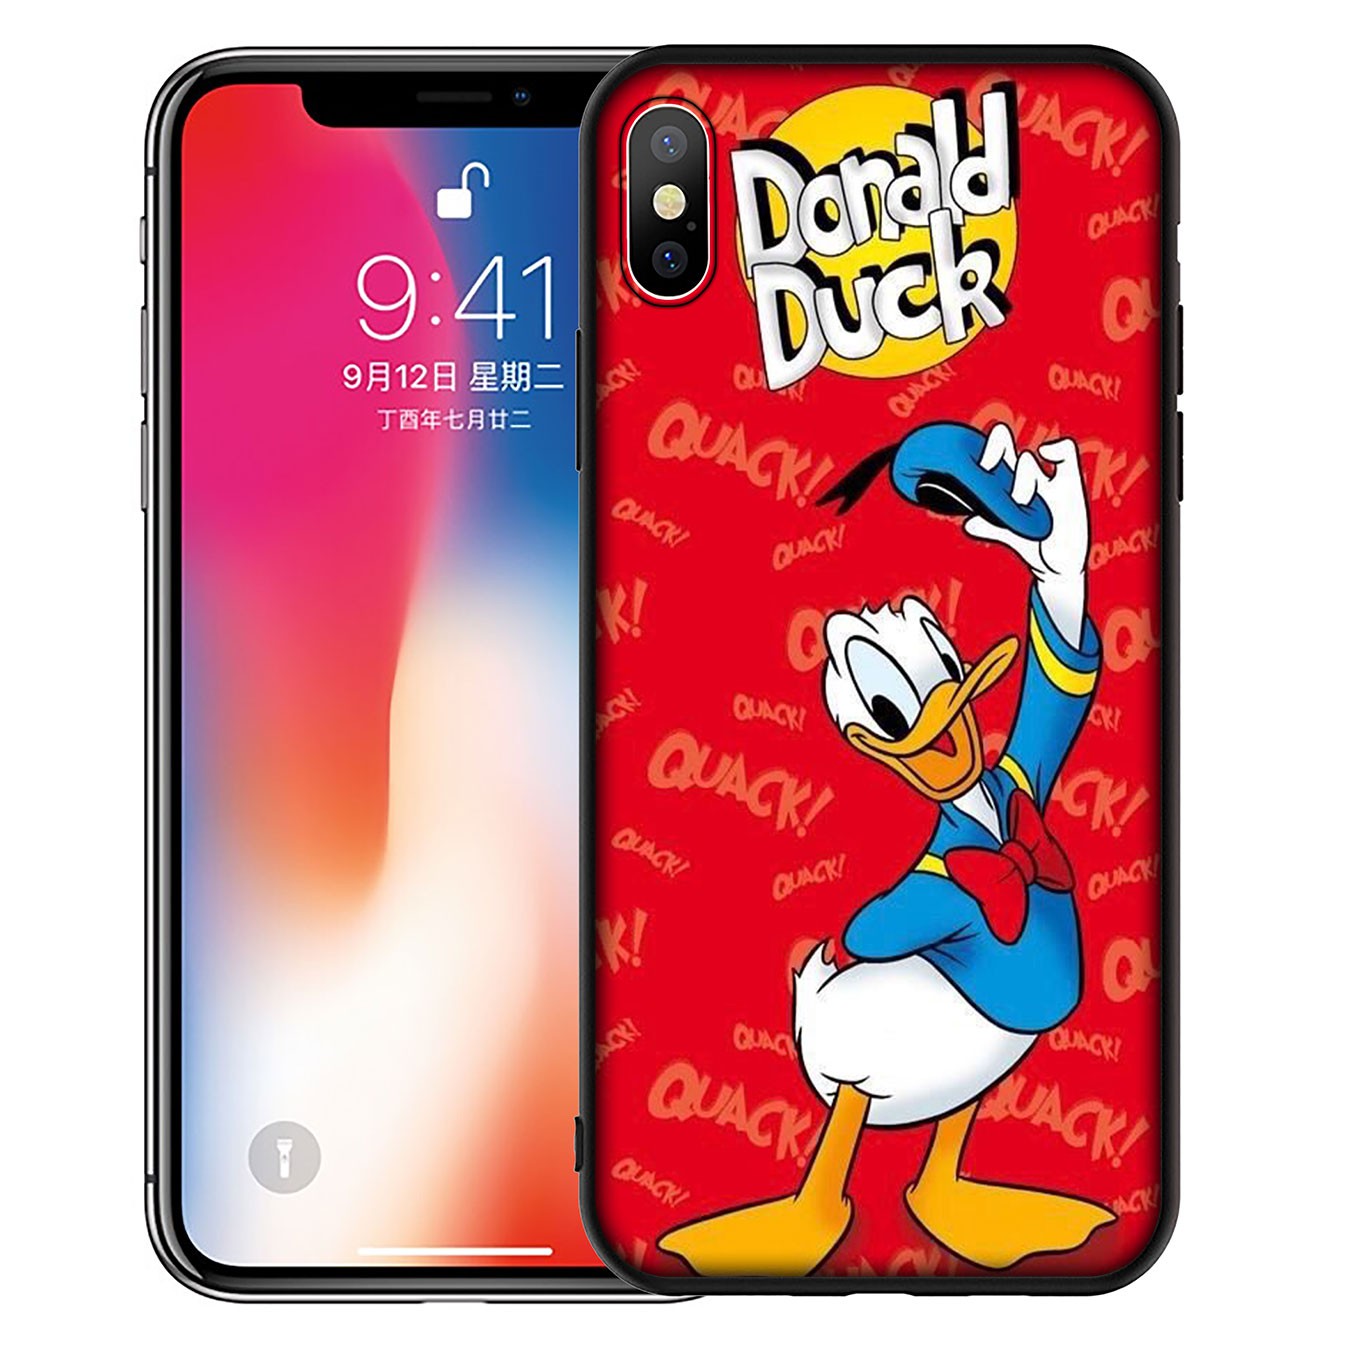 Samsung Galaxy S21 Ultra S8 Plus F62 M62 A2 A32 A52 A72 S21+ S8+ S21Plus Casing Soft Silicone Phone Case Mickey Mouse Donald Duck Cover